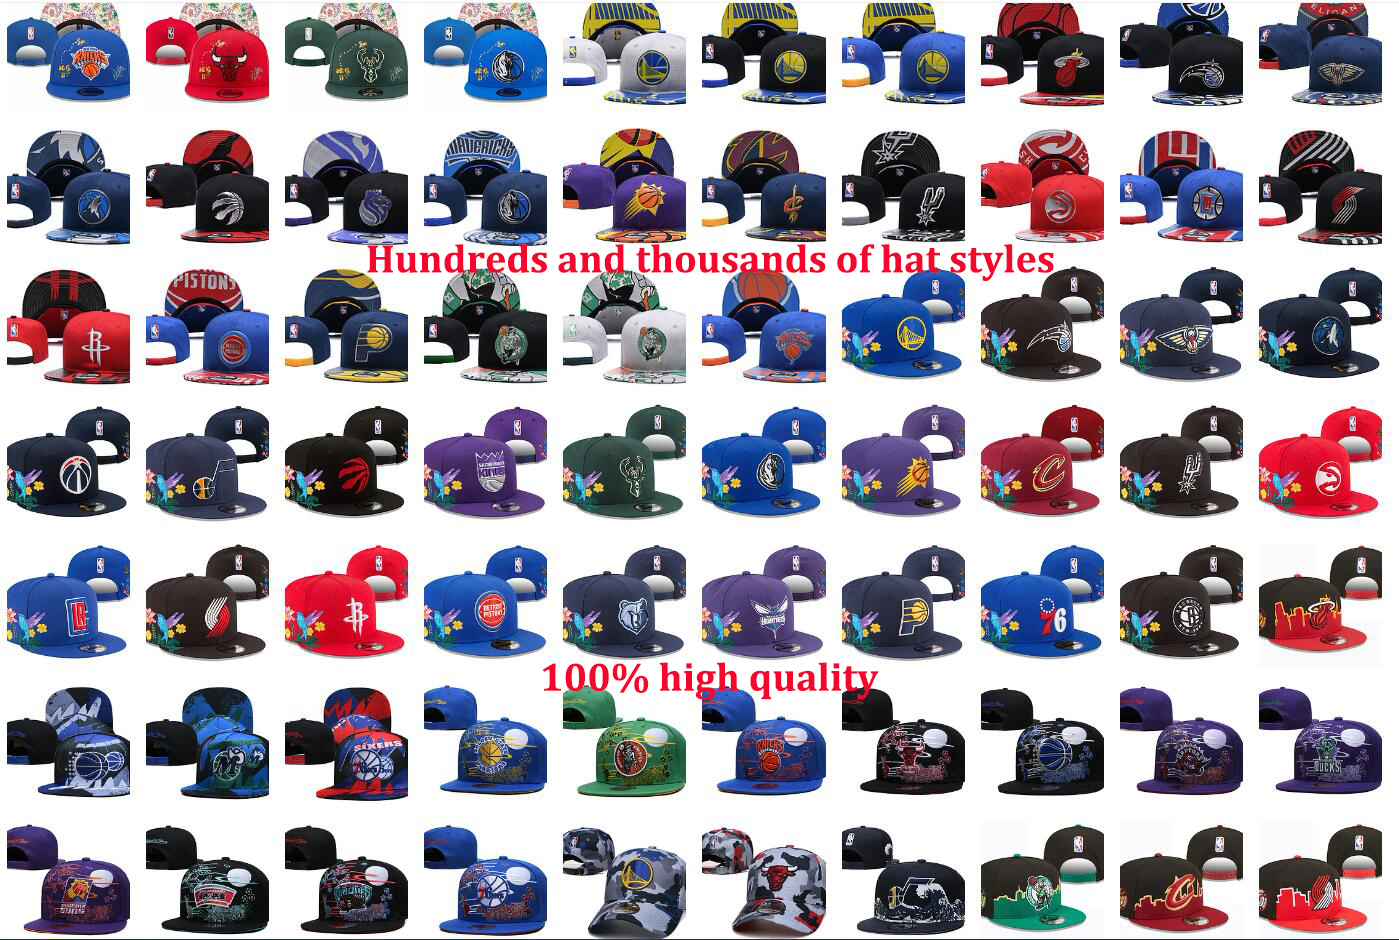 Trusted Top Quality Ball Beanies Globle Levered America Football Team Hatts Män Caps New Ankomst HotSeller Hat Factory